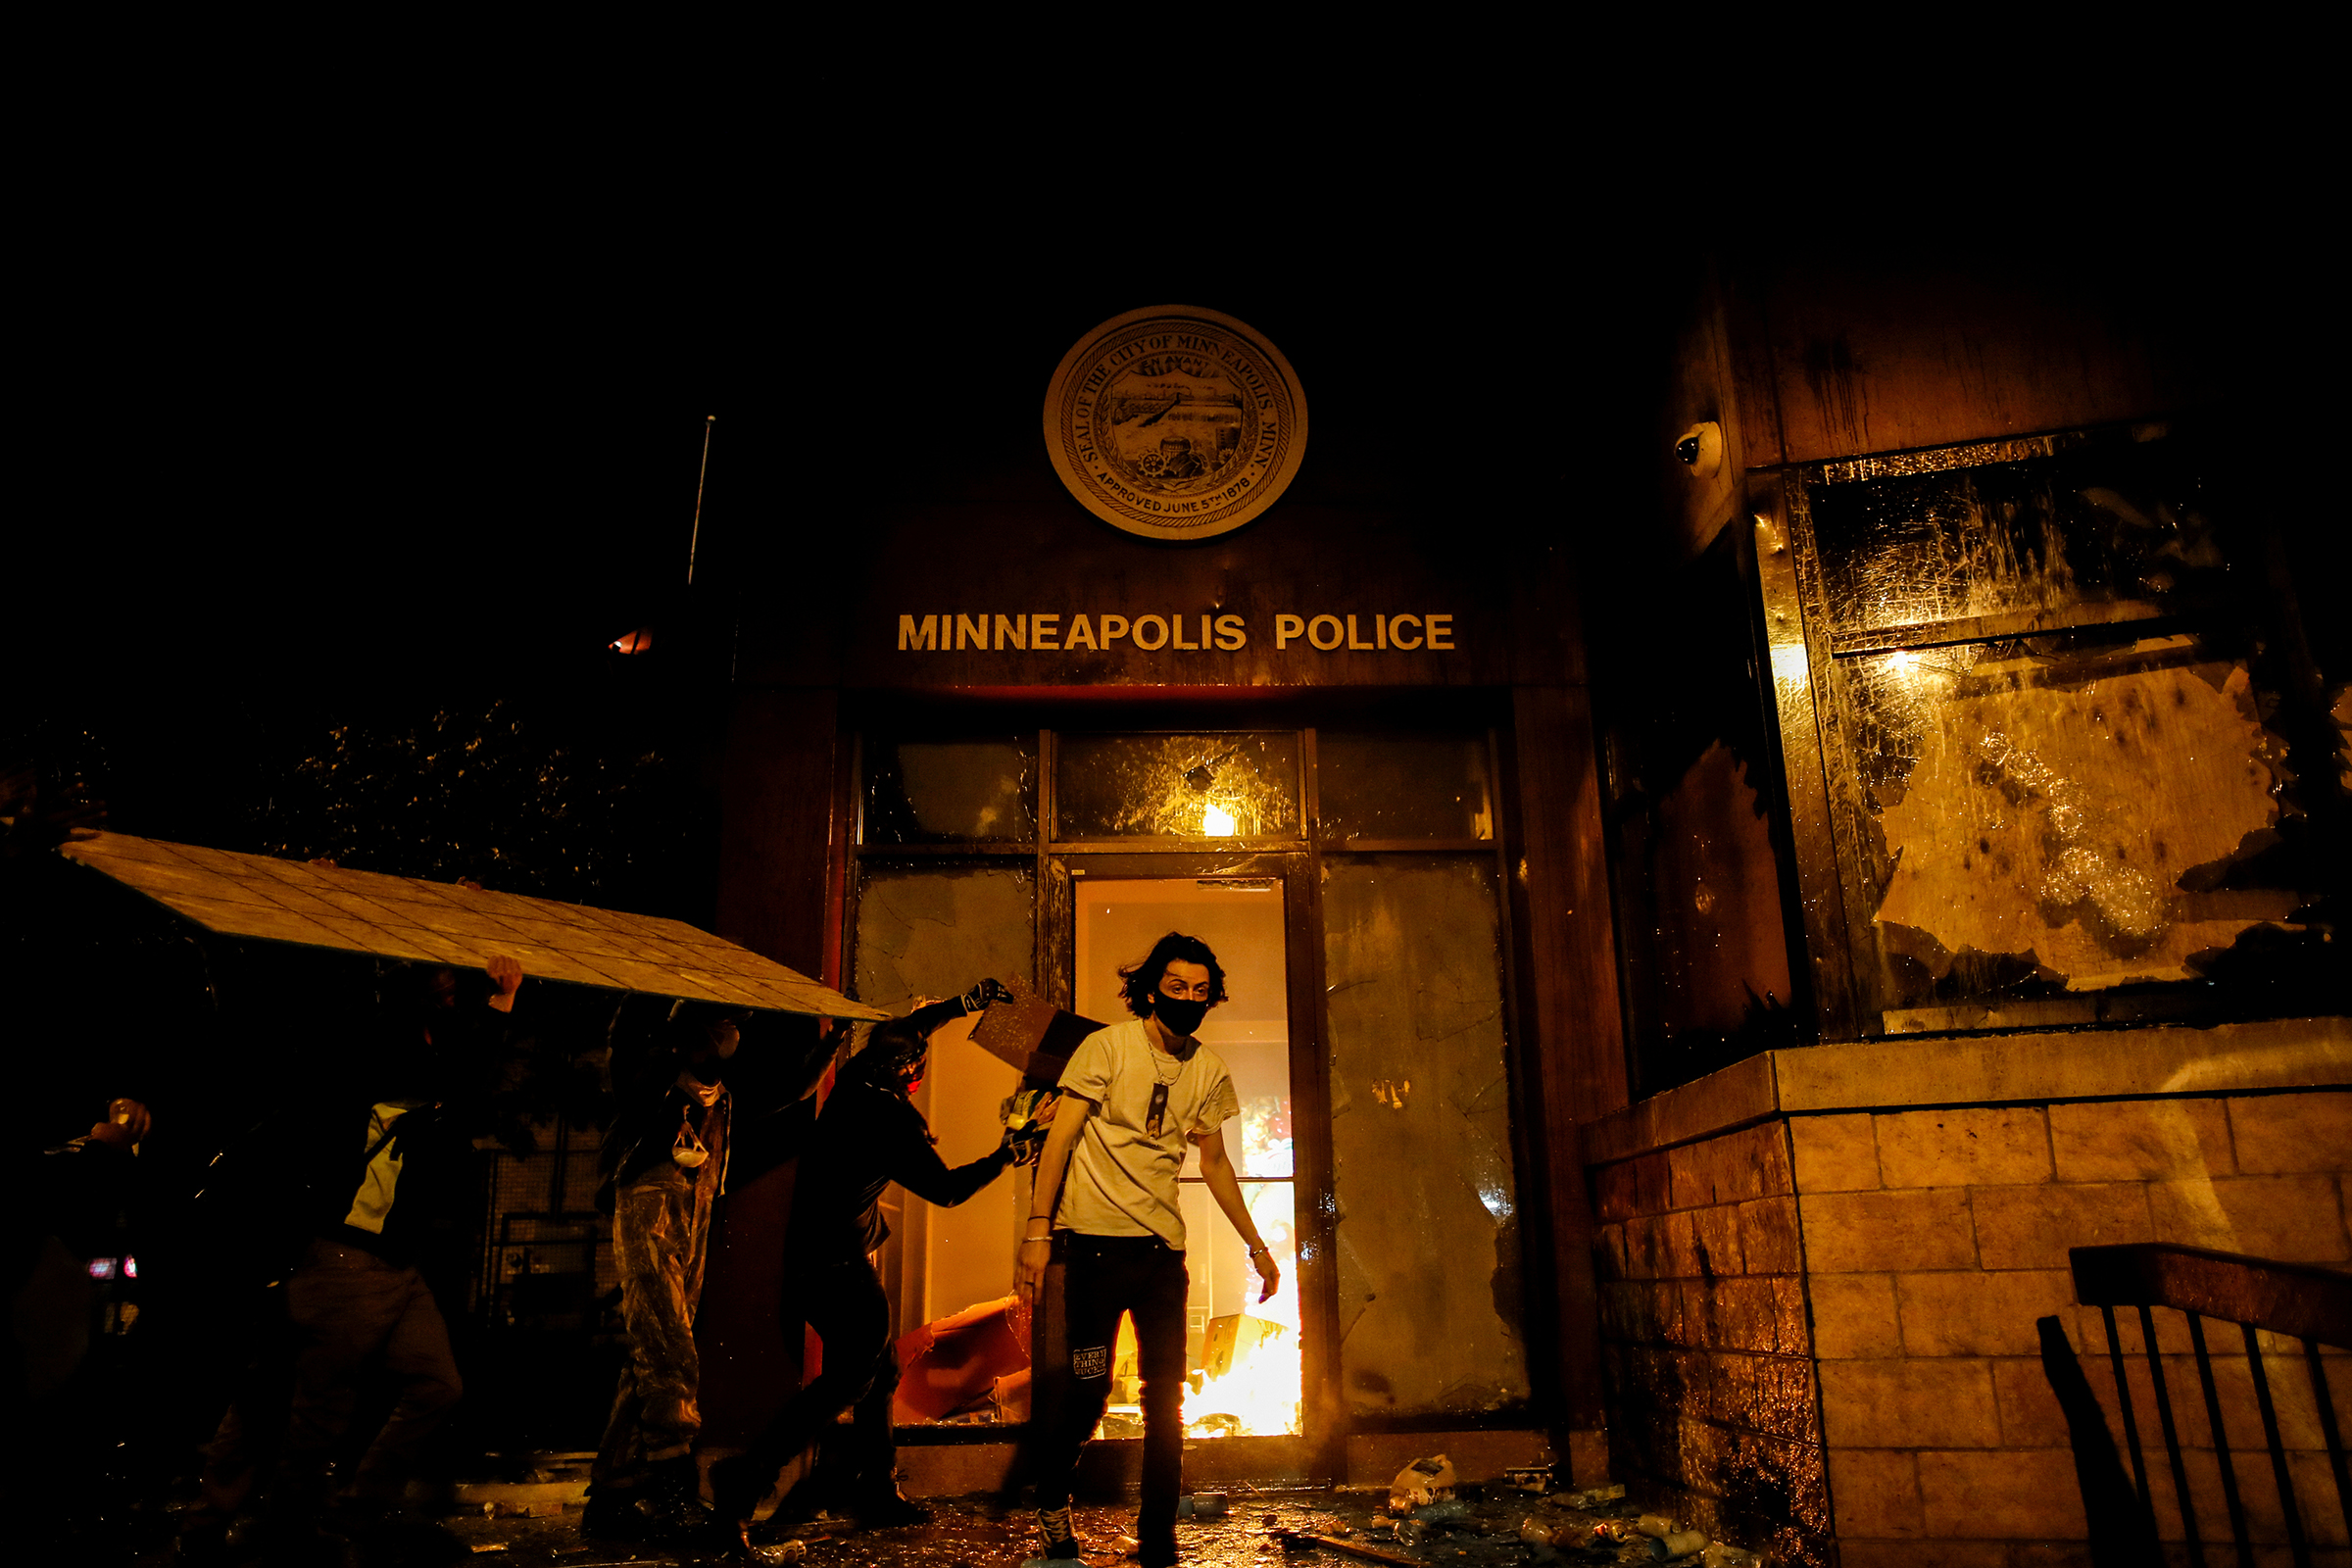 Protesters set fire to the entrance of the 3rd precinct on May 28. (Carlos Barria—Reuters)